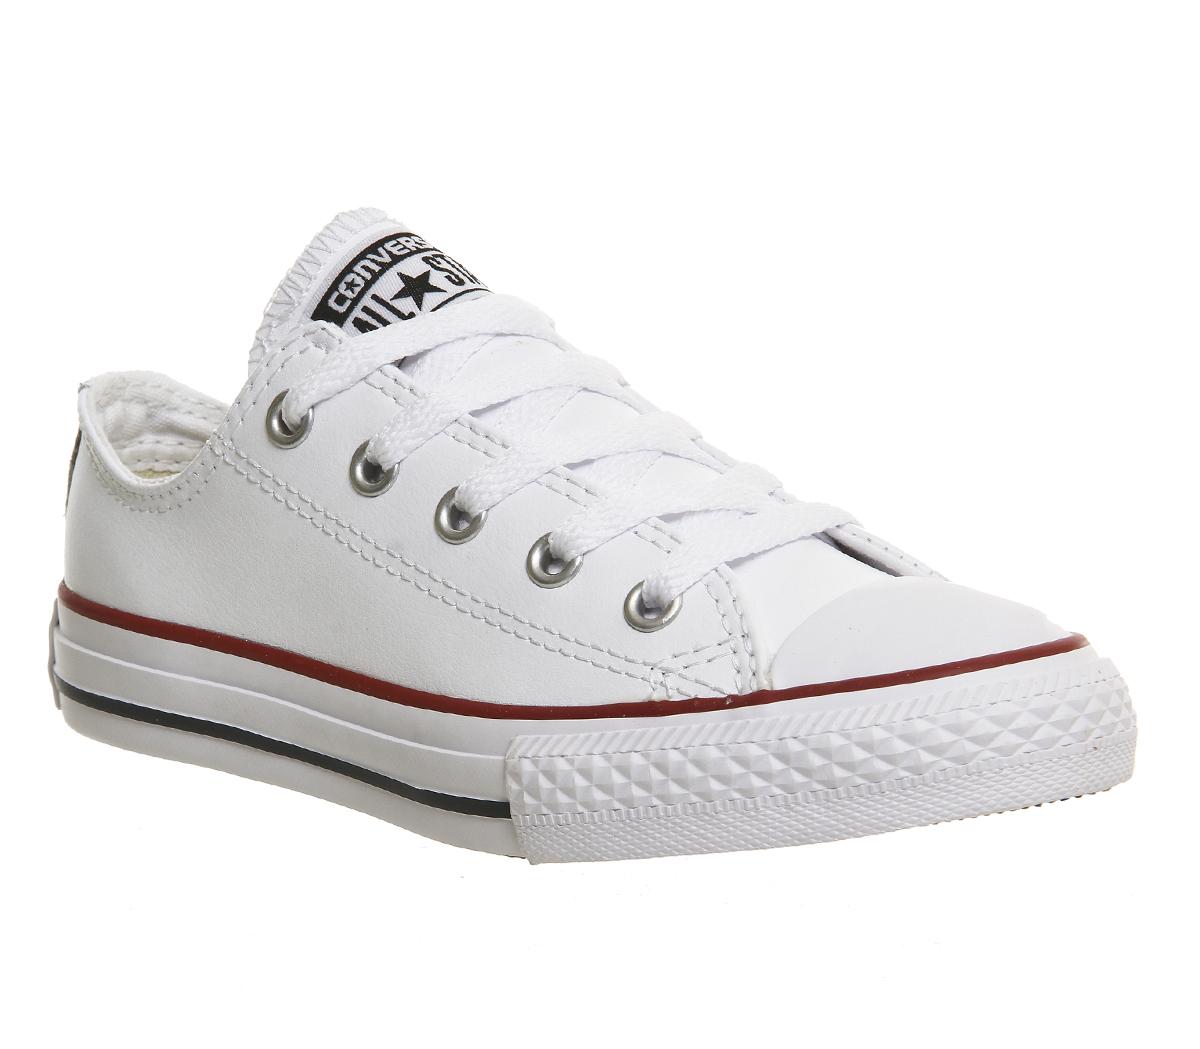 Converse All Star Low Youth Optical White Leather - Unisex